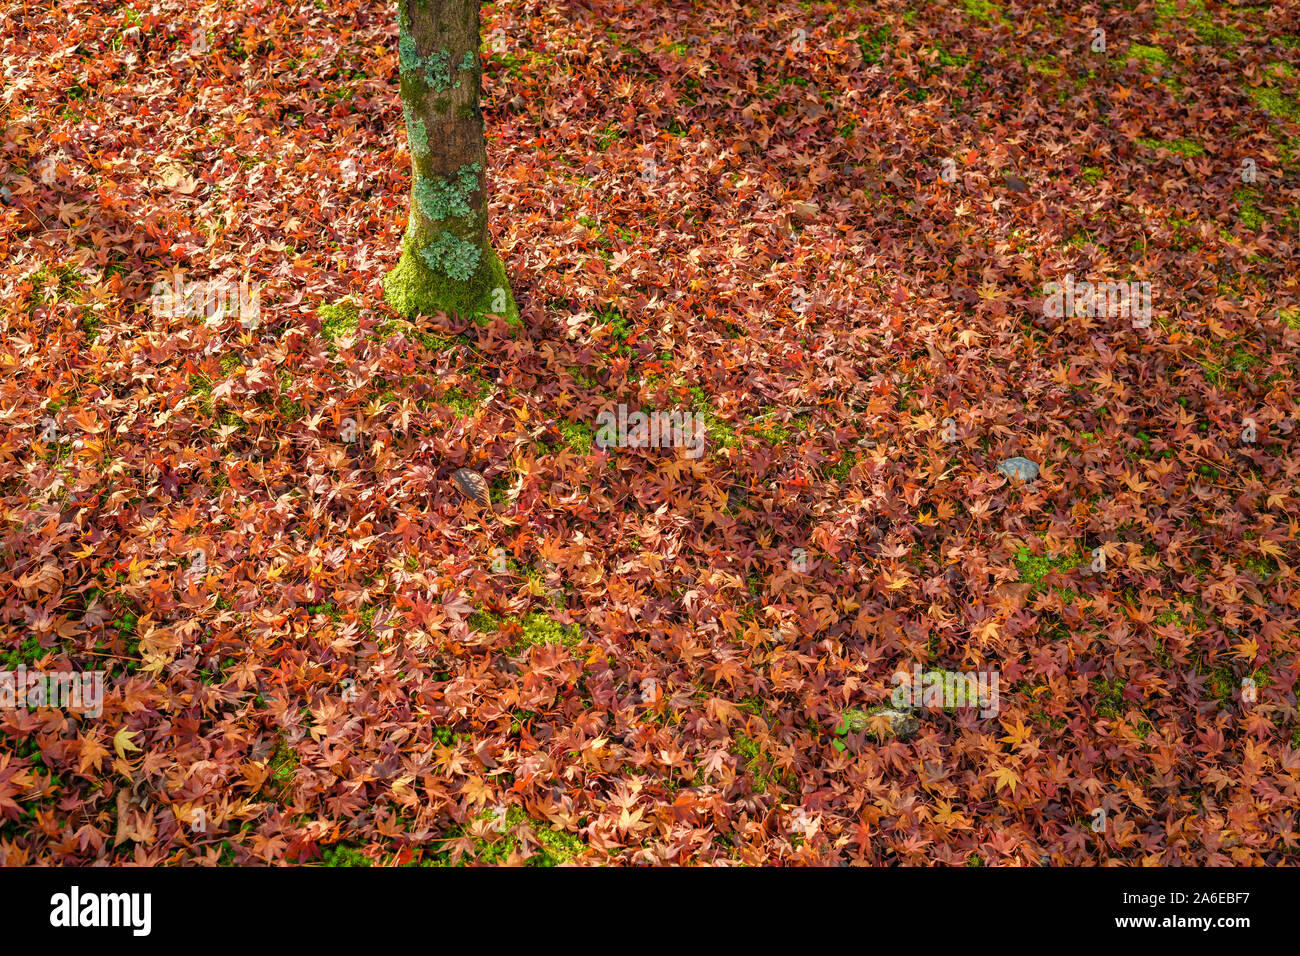 Details of colorful red autumn leaves covering ground in Japan. Stock Photo